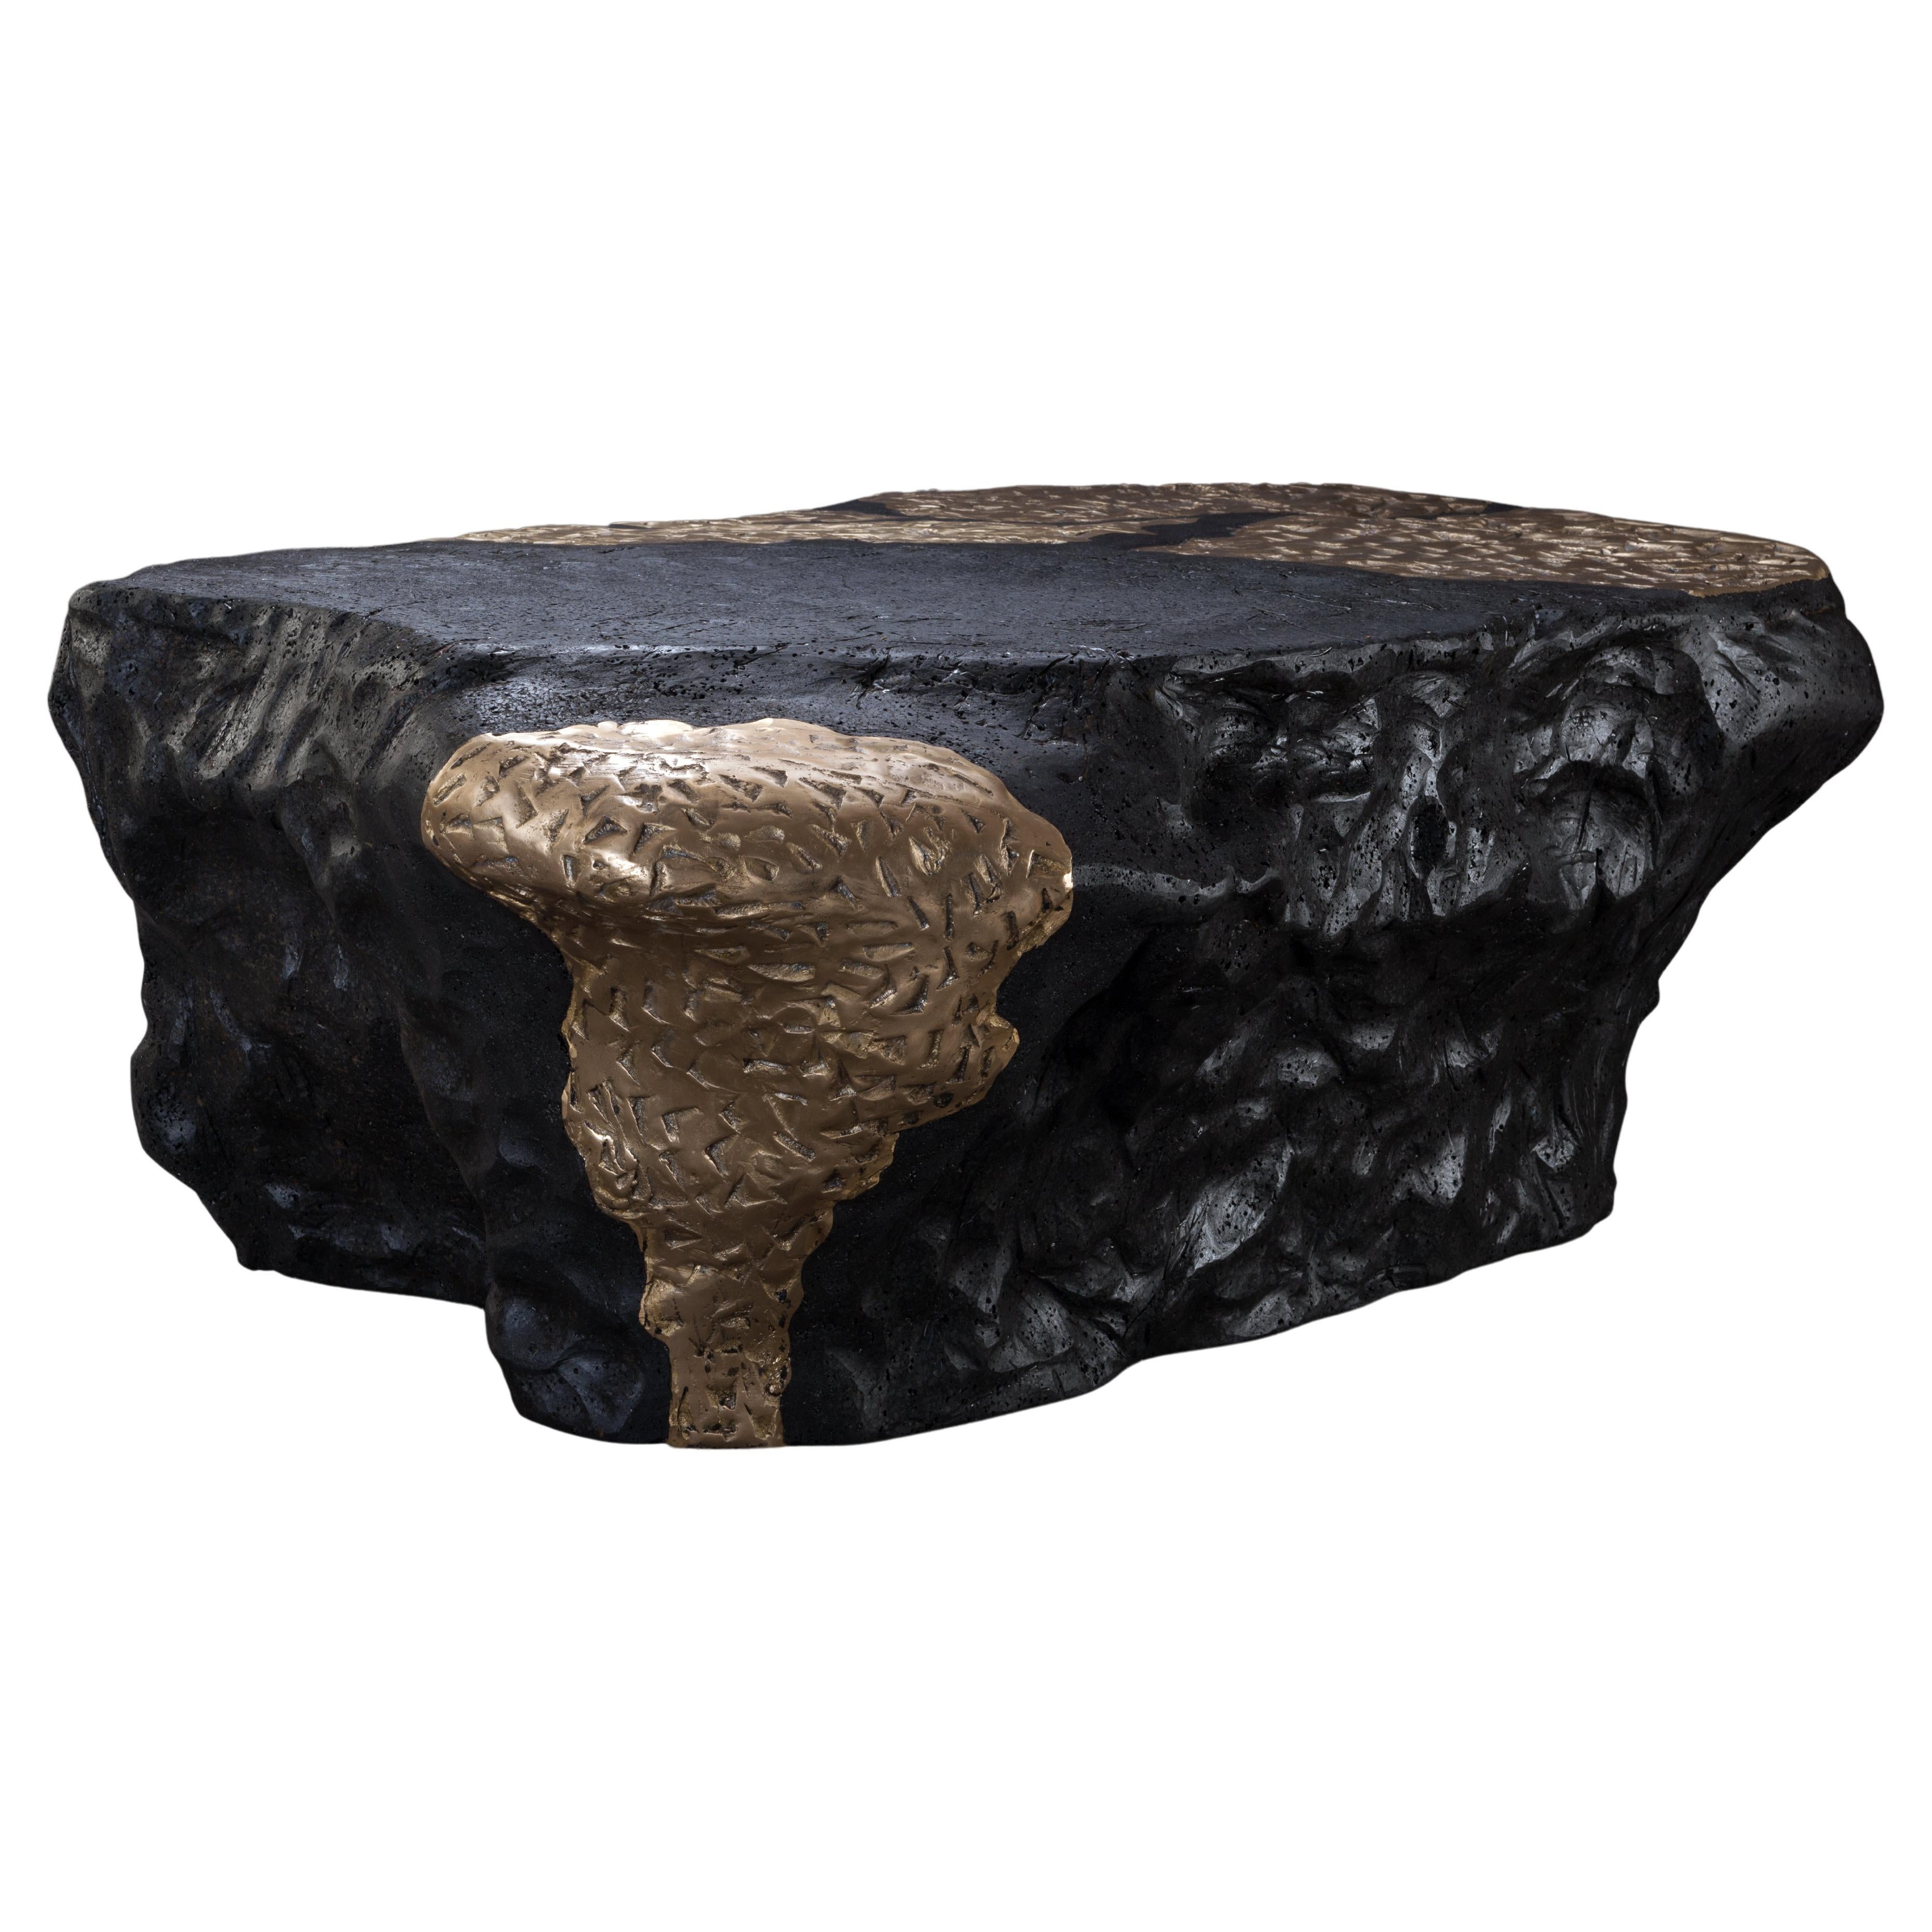 Sculpted from coal and custom textured brass, this limited-edition centre table is handcrafted to perfectly bring together elements that create warmth and aspiration.
The coveted line of furniture from RIZO is a result of innate passion for